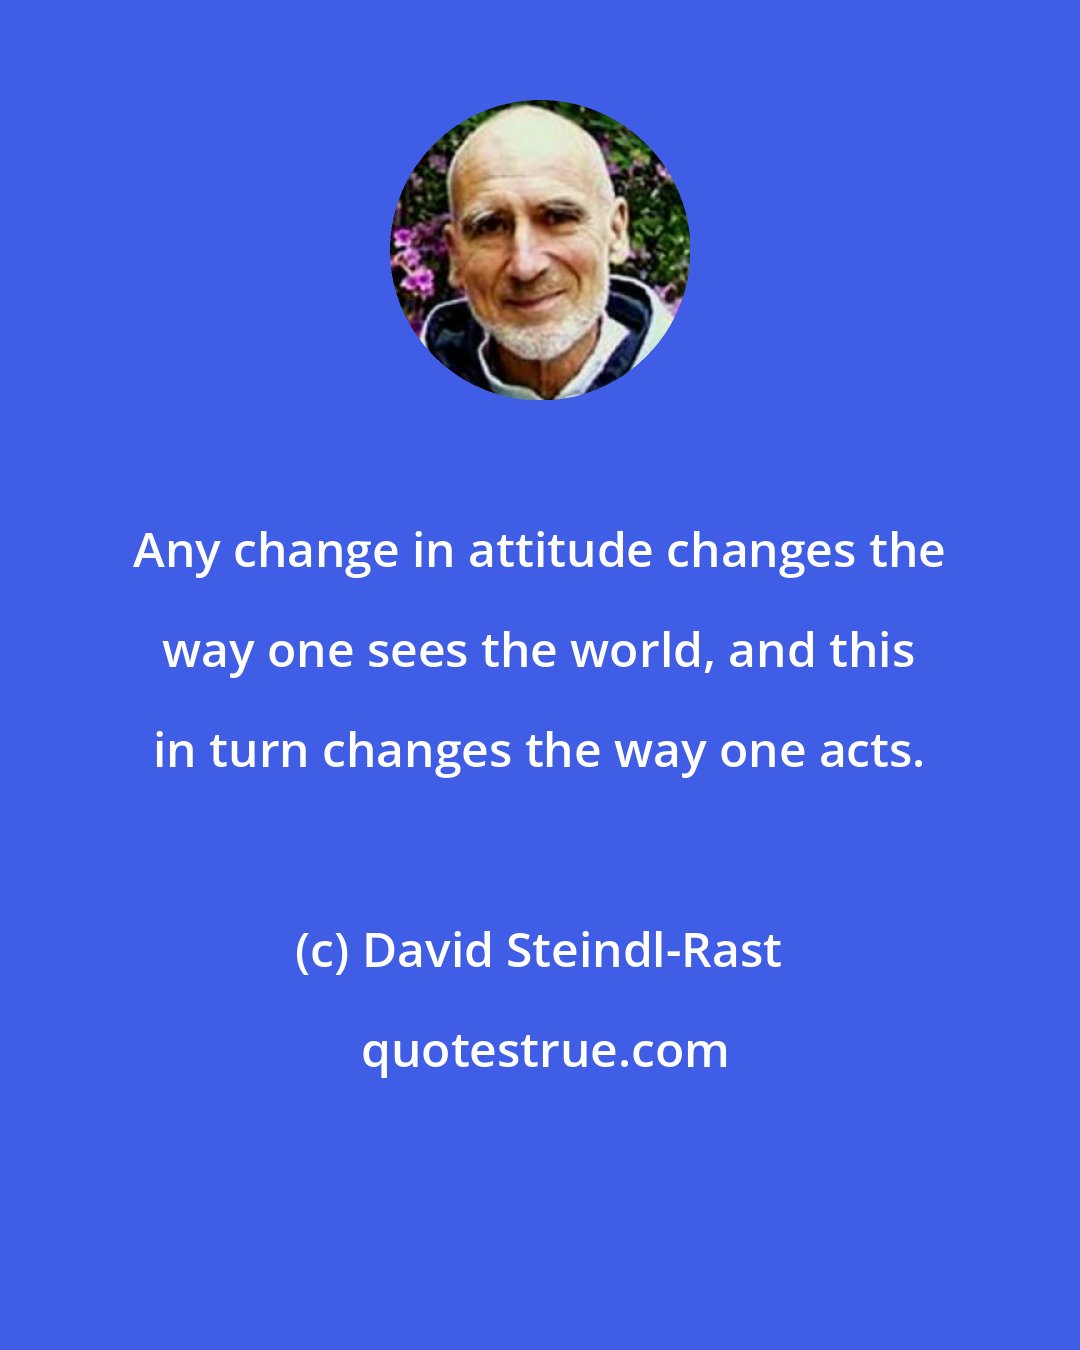 David Steindl-Rast: Any change in attitude changes the way one sees the world, and this in turn changes the way one acts.